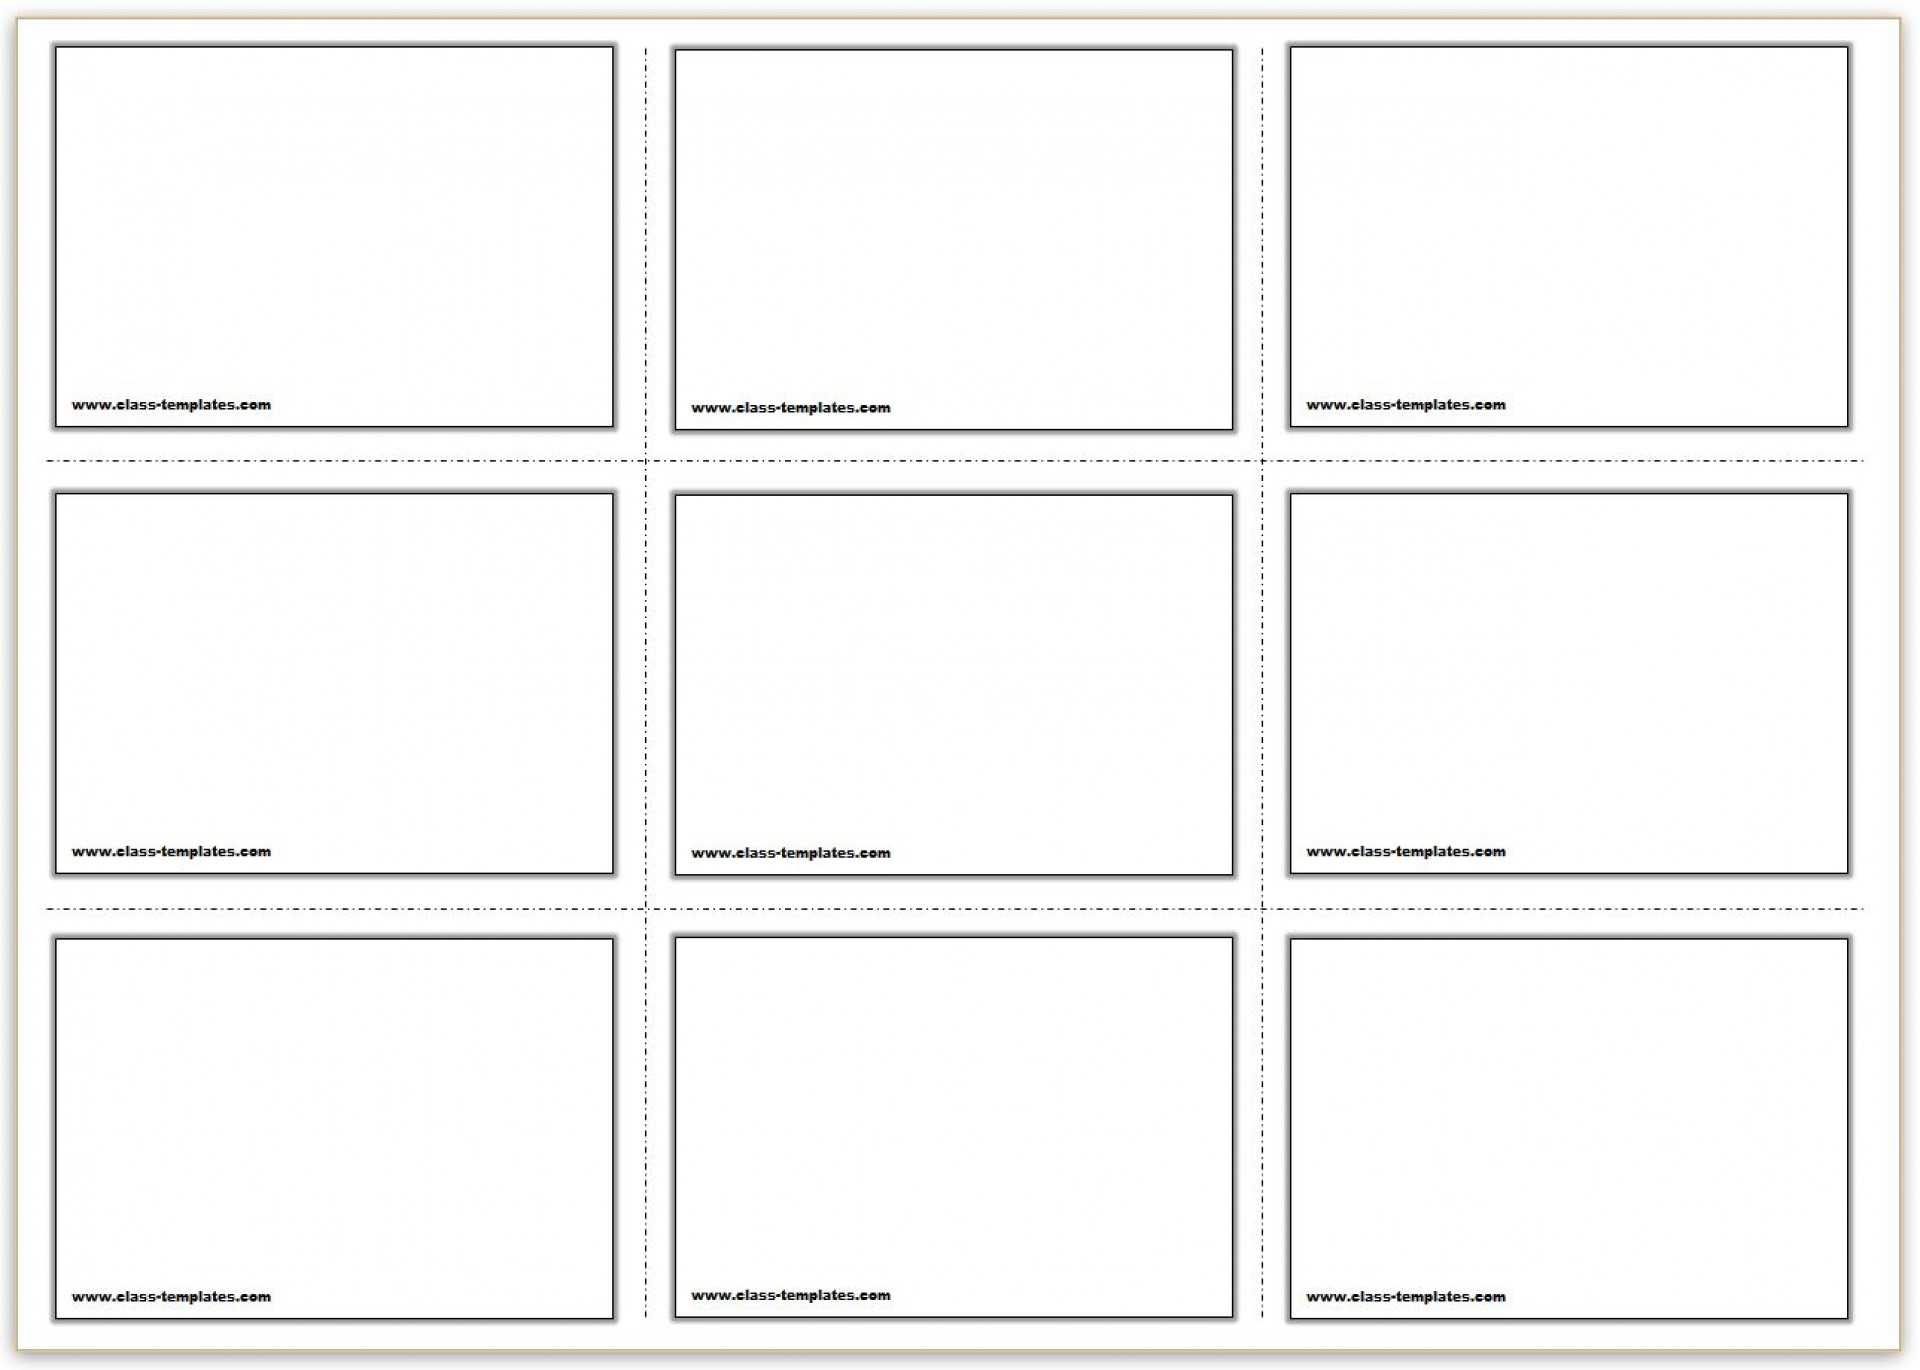 002 Printable Flash Cards Template 3X3 Ideas Free Card Regarding Free Printable Blank Flash Cards Template